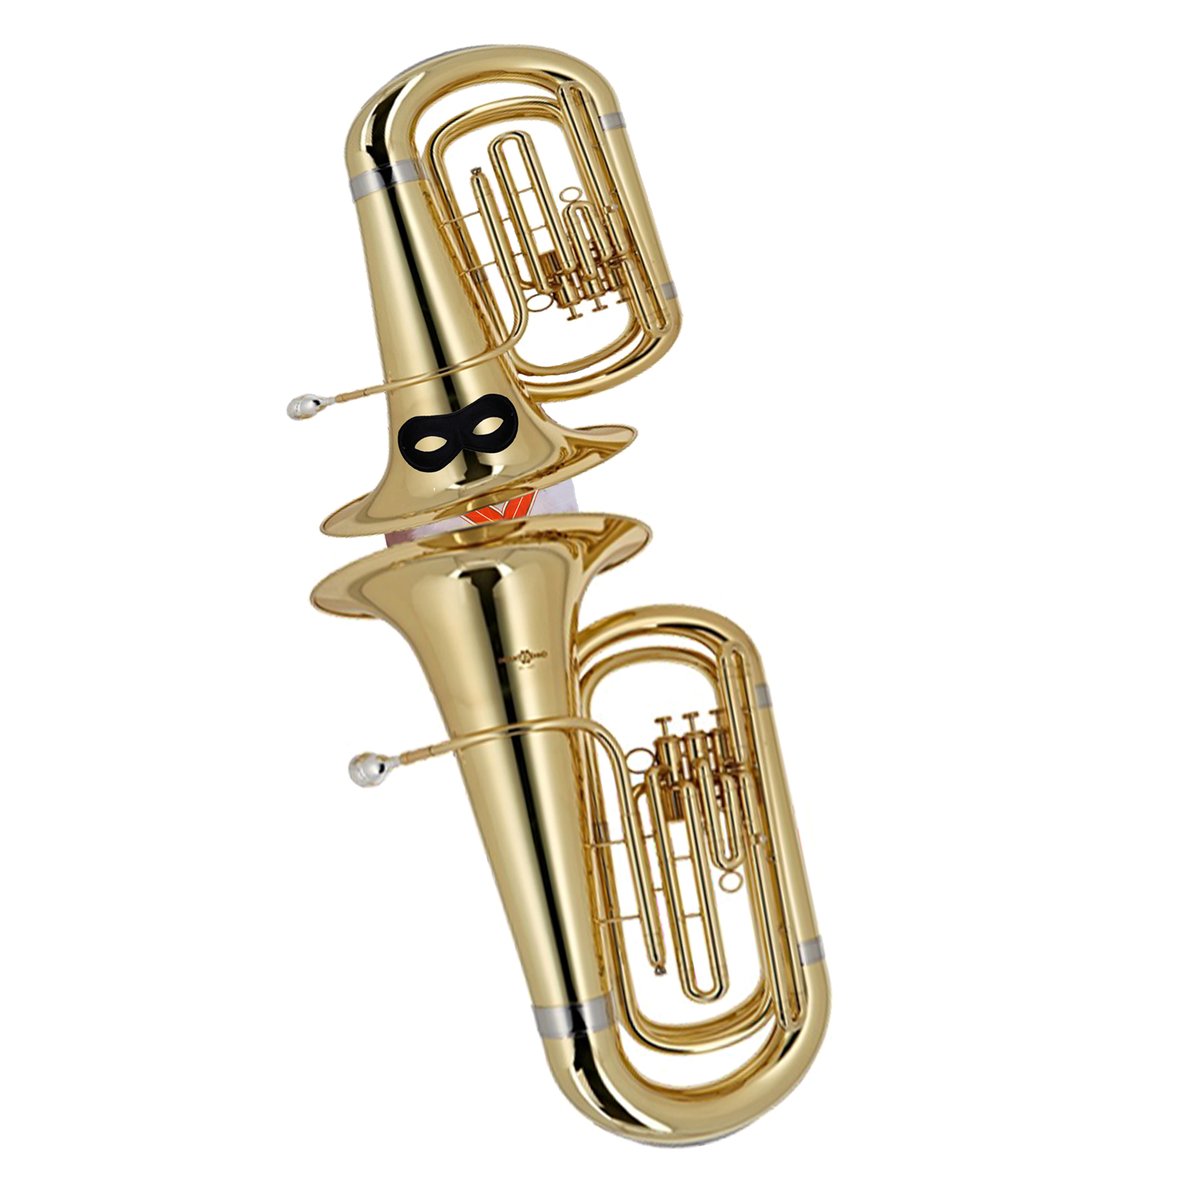 Okay, #Fellas - because i don't want any of you thinking I'm a bully or a martinet, let it be known I will not put the commandos of Tuba Division through anything I'm not prepared to endure myself. I am now in the Tuba of Shame. #NAFO